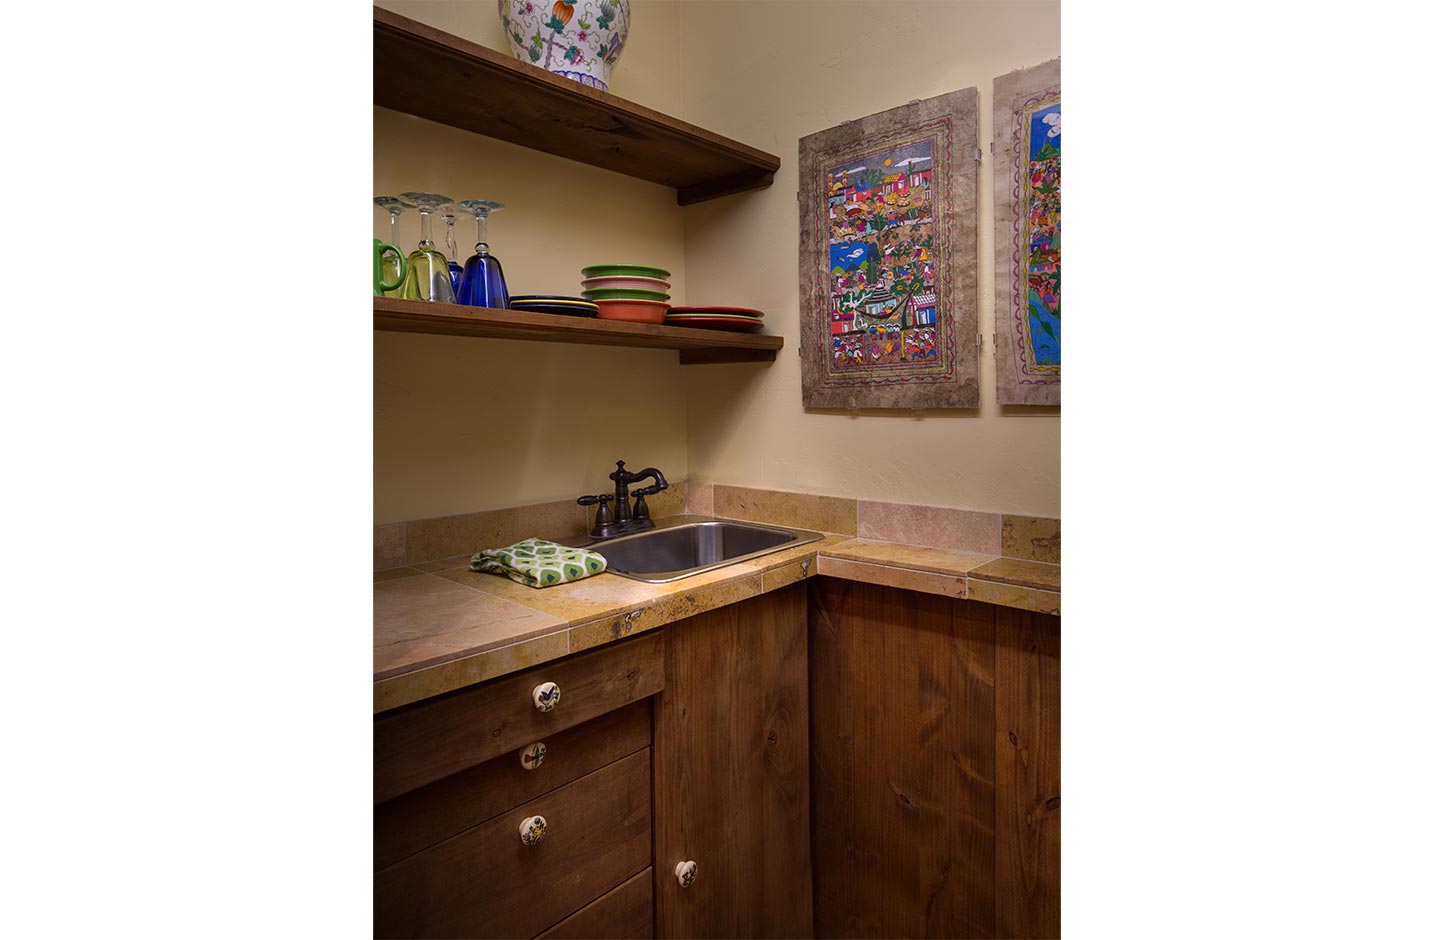 A kitchenette with shelves and dishes